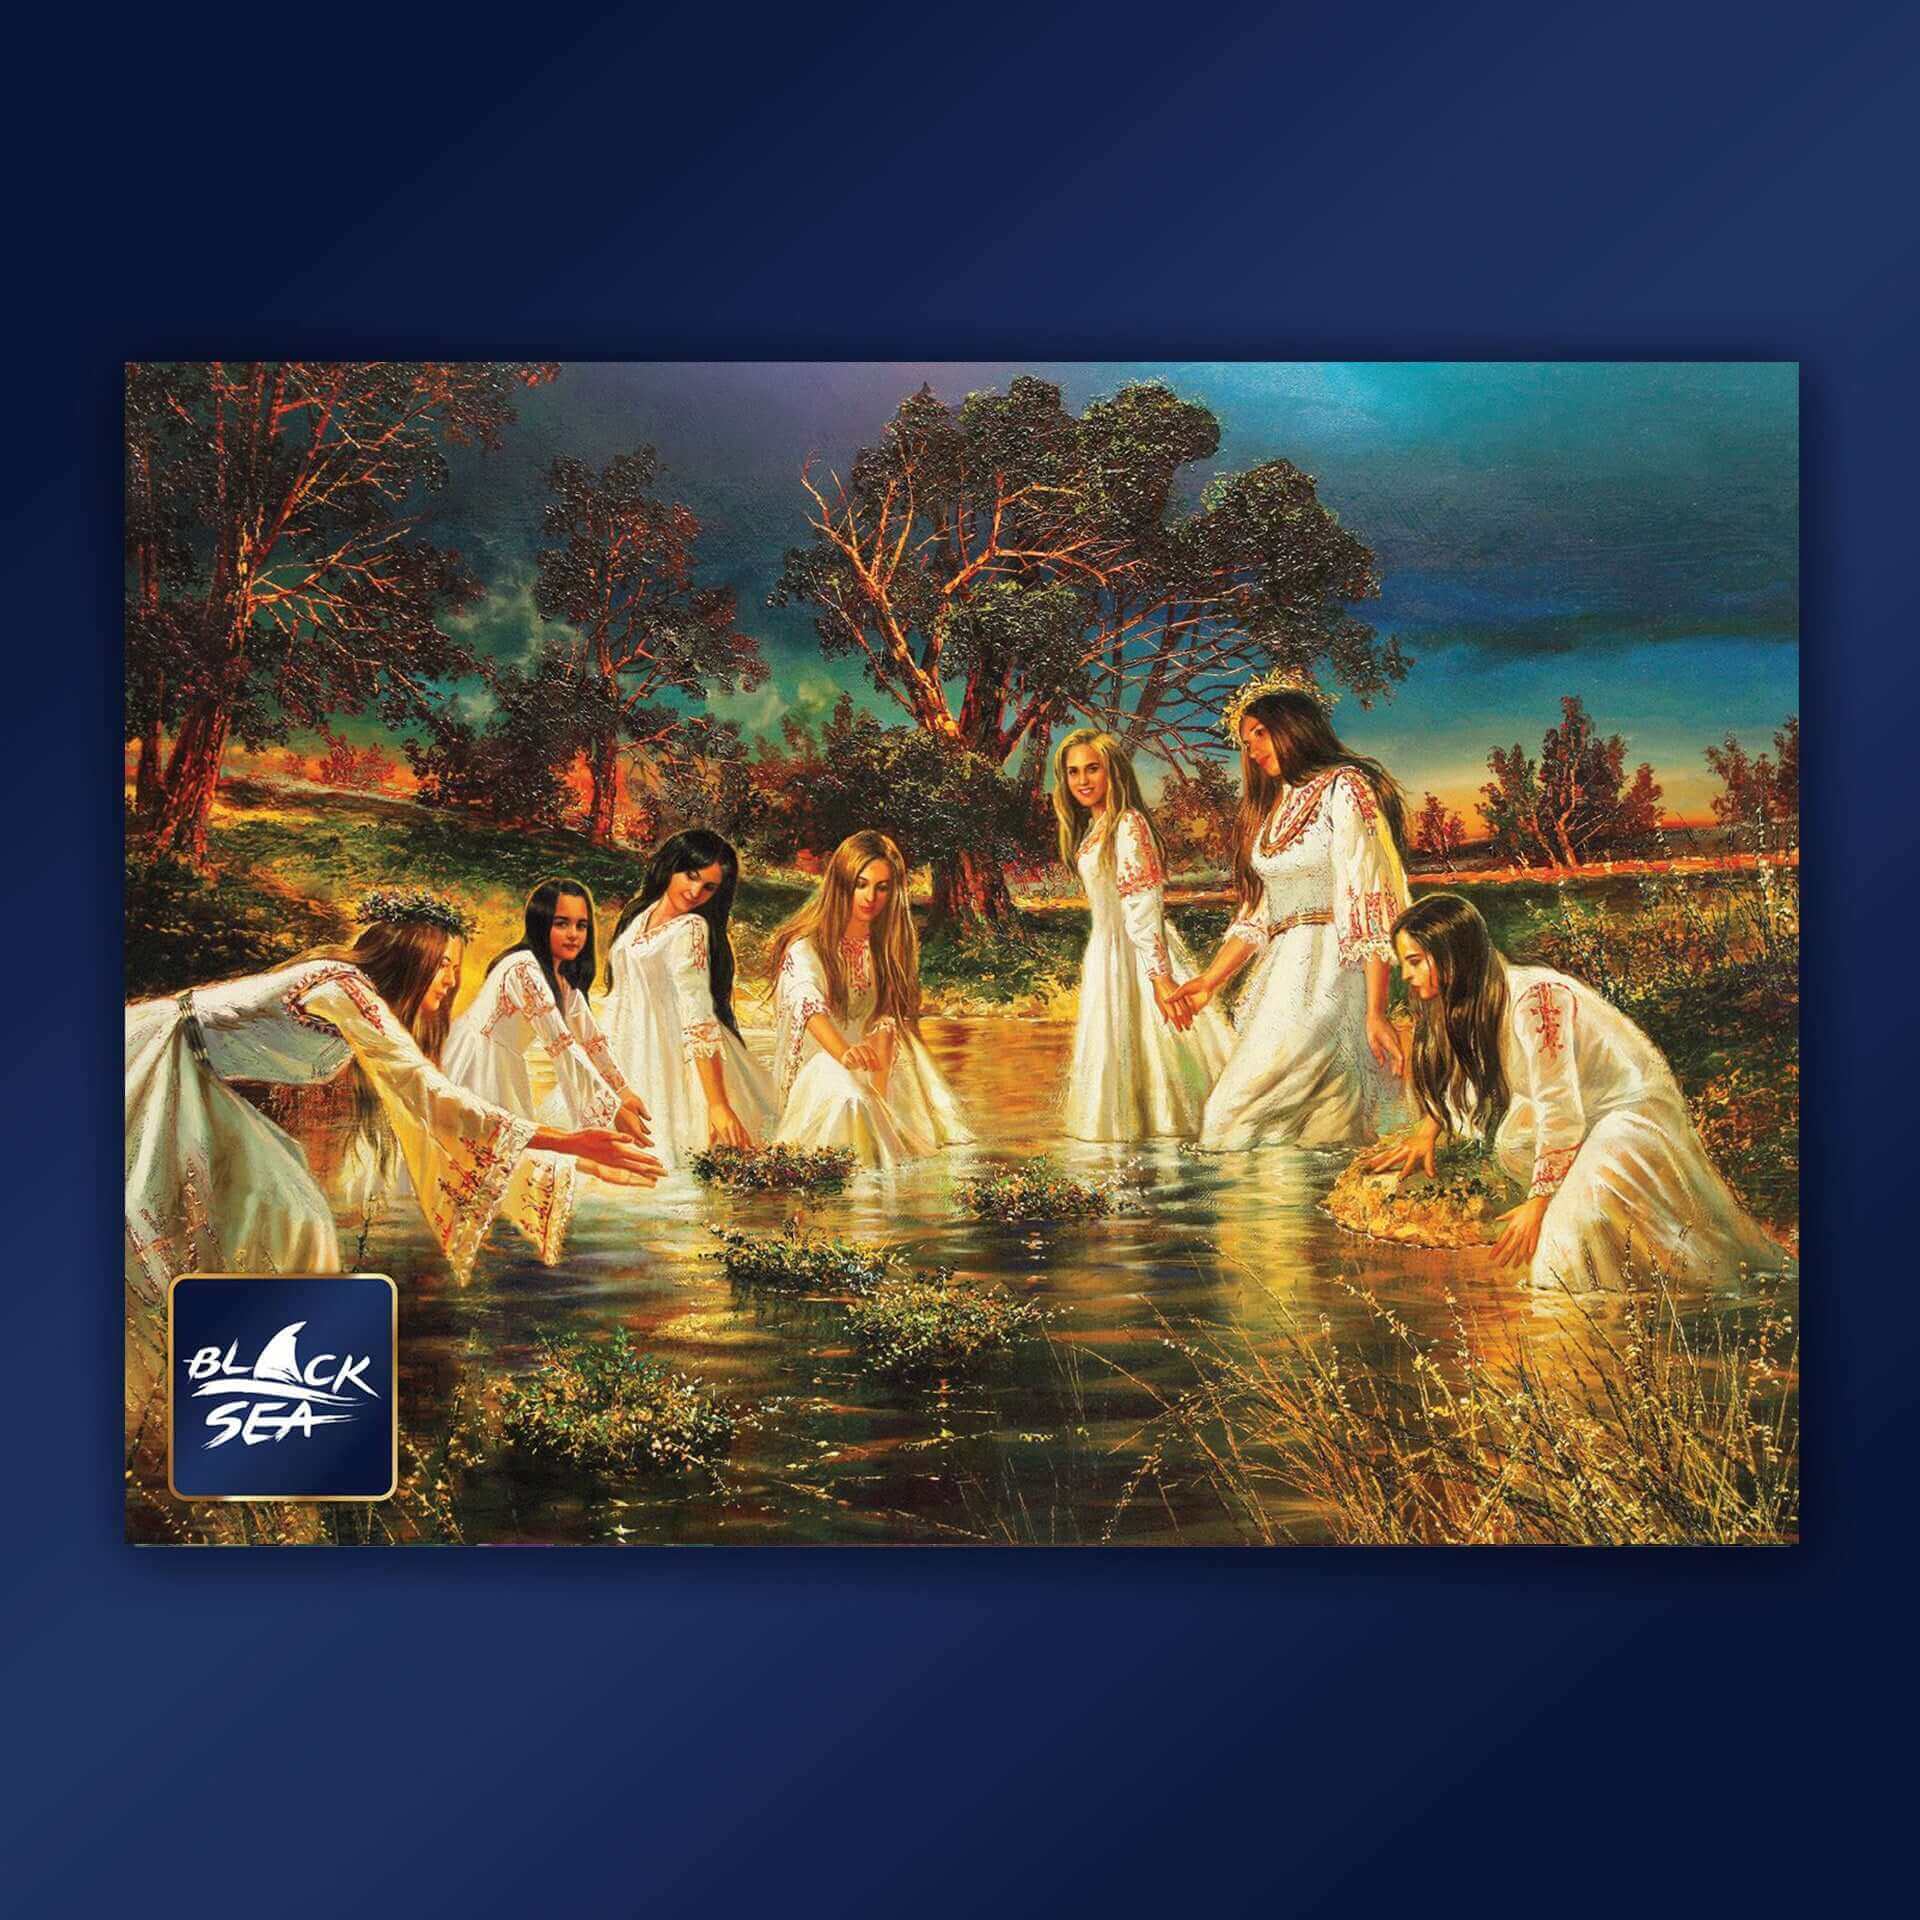 Puzzle Black Sea Premium 1000 pieces - Enyovden, Midsummer's Day is known as Enyovden in Bulgaria and is one of the dearest folklore celebrations in Bulgaria, loaded with the magic of herbal scent, water, fire and the Sun. According to the tradition, on t